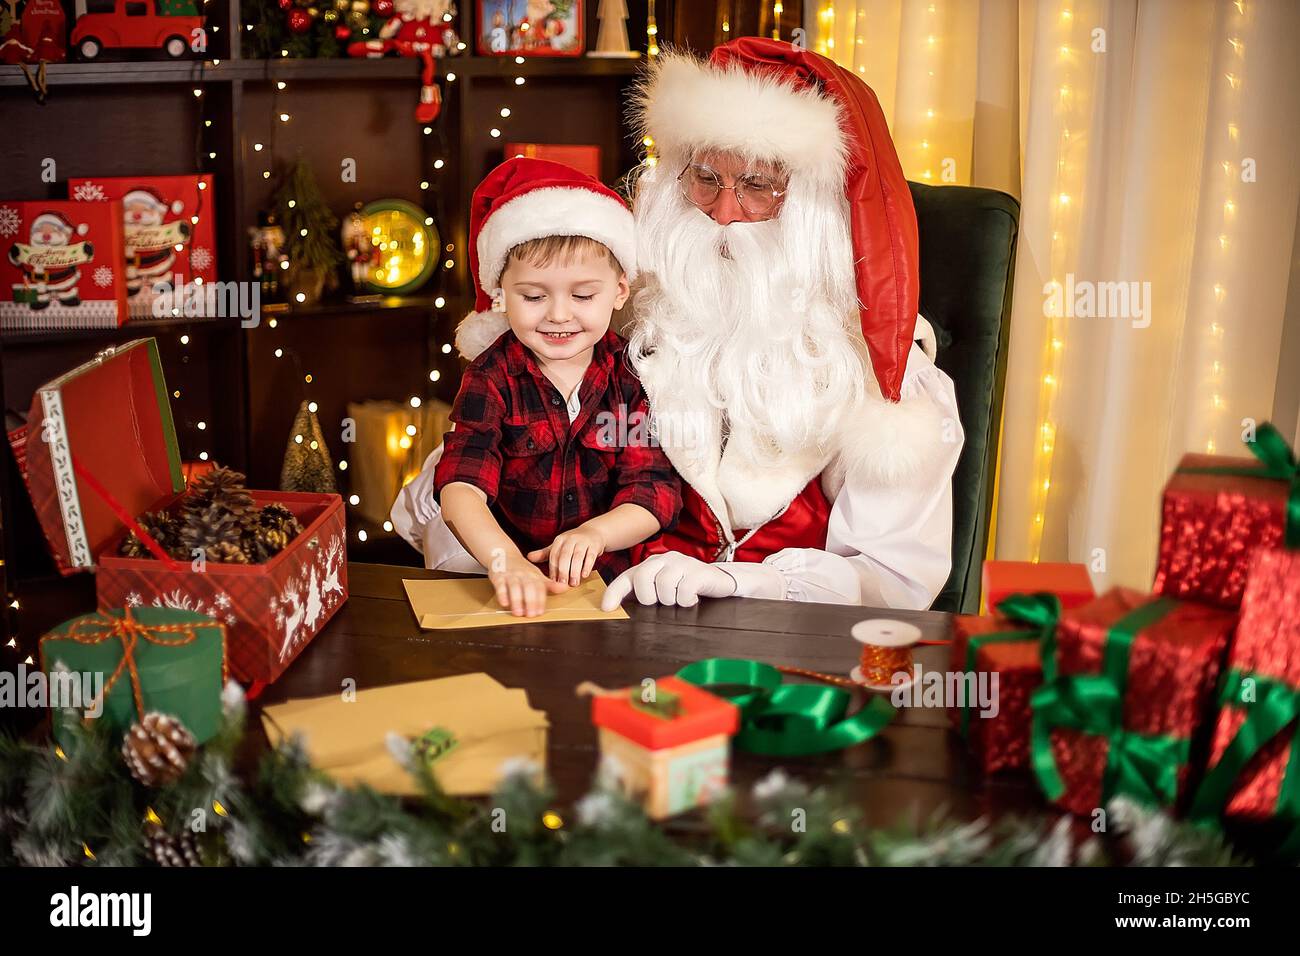 Little child boy visits Santa Claus helps him open envelopes with Christmas wishes. Holidays concept Stock Photo